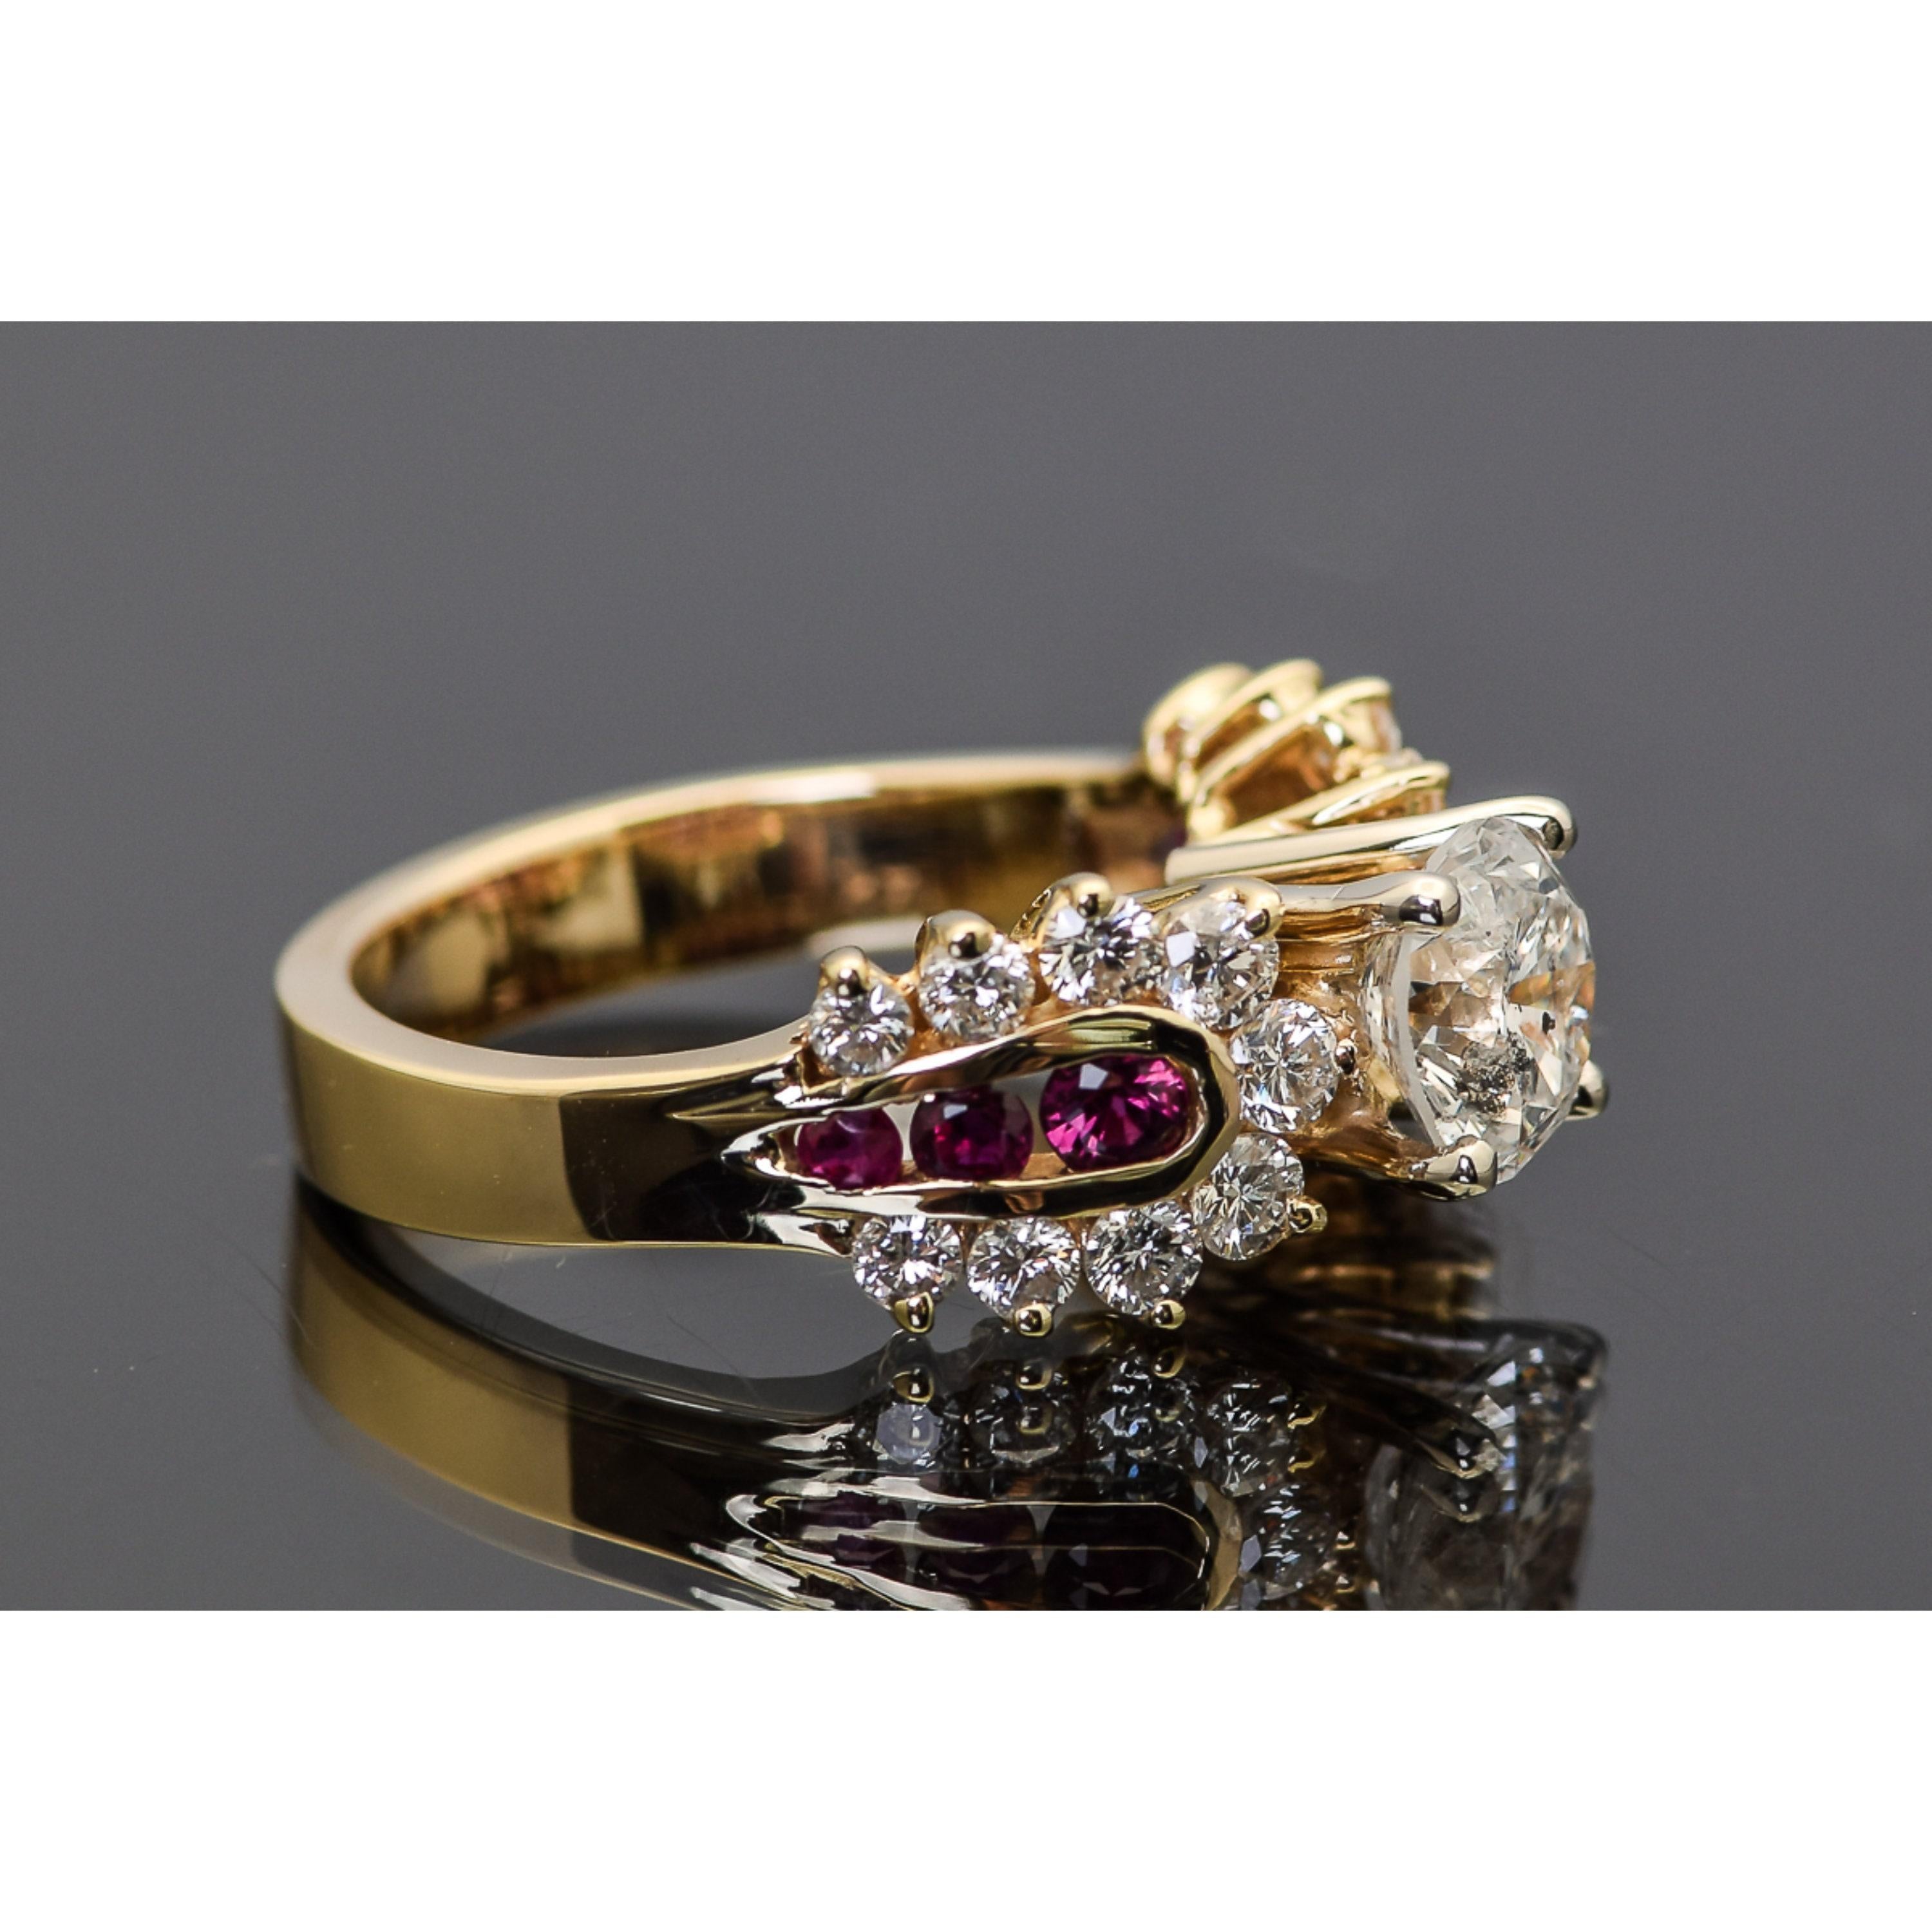 For Sale:  Certified 2.43 Carat Diamond Ruby Art Deco Style Engagement Ring in 18K Gold 3